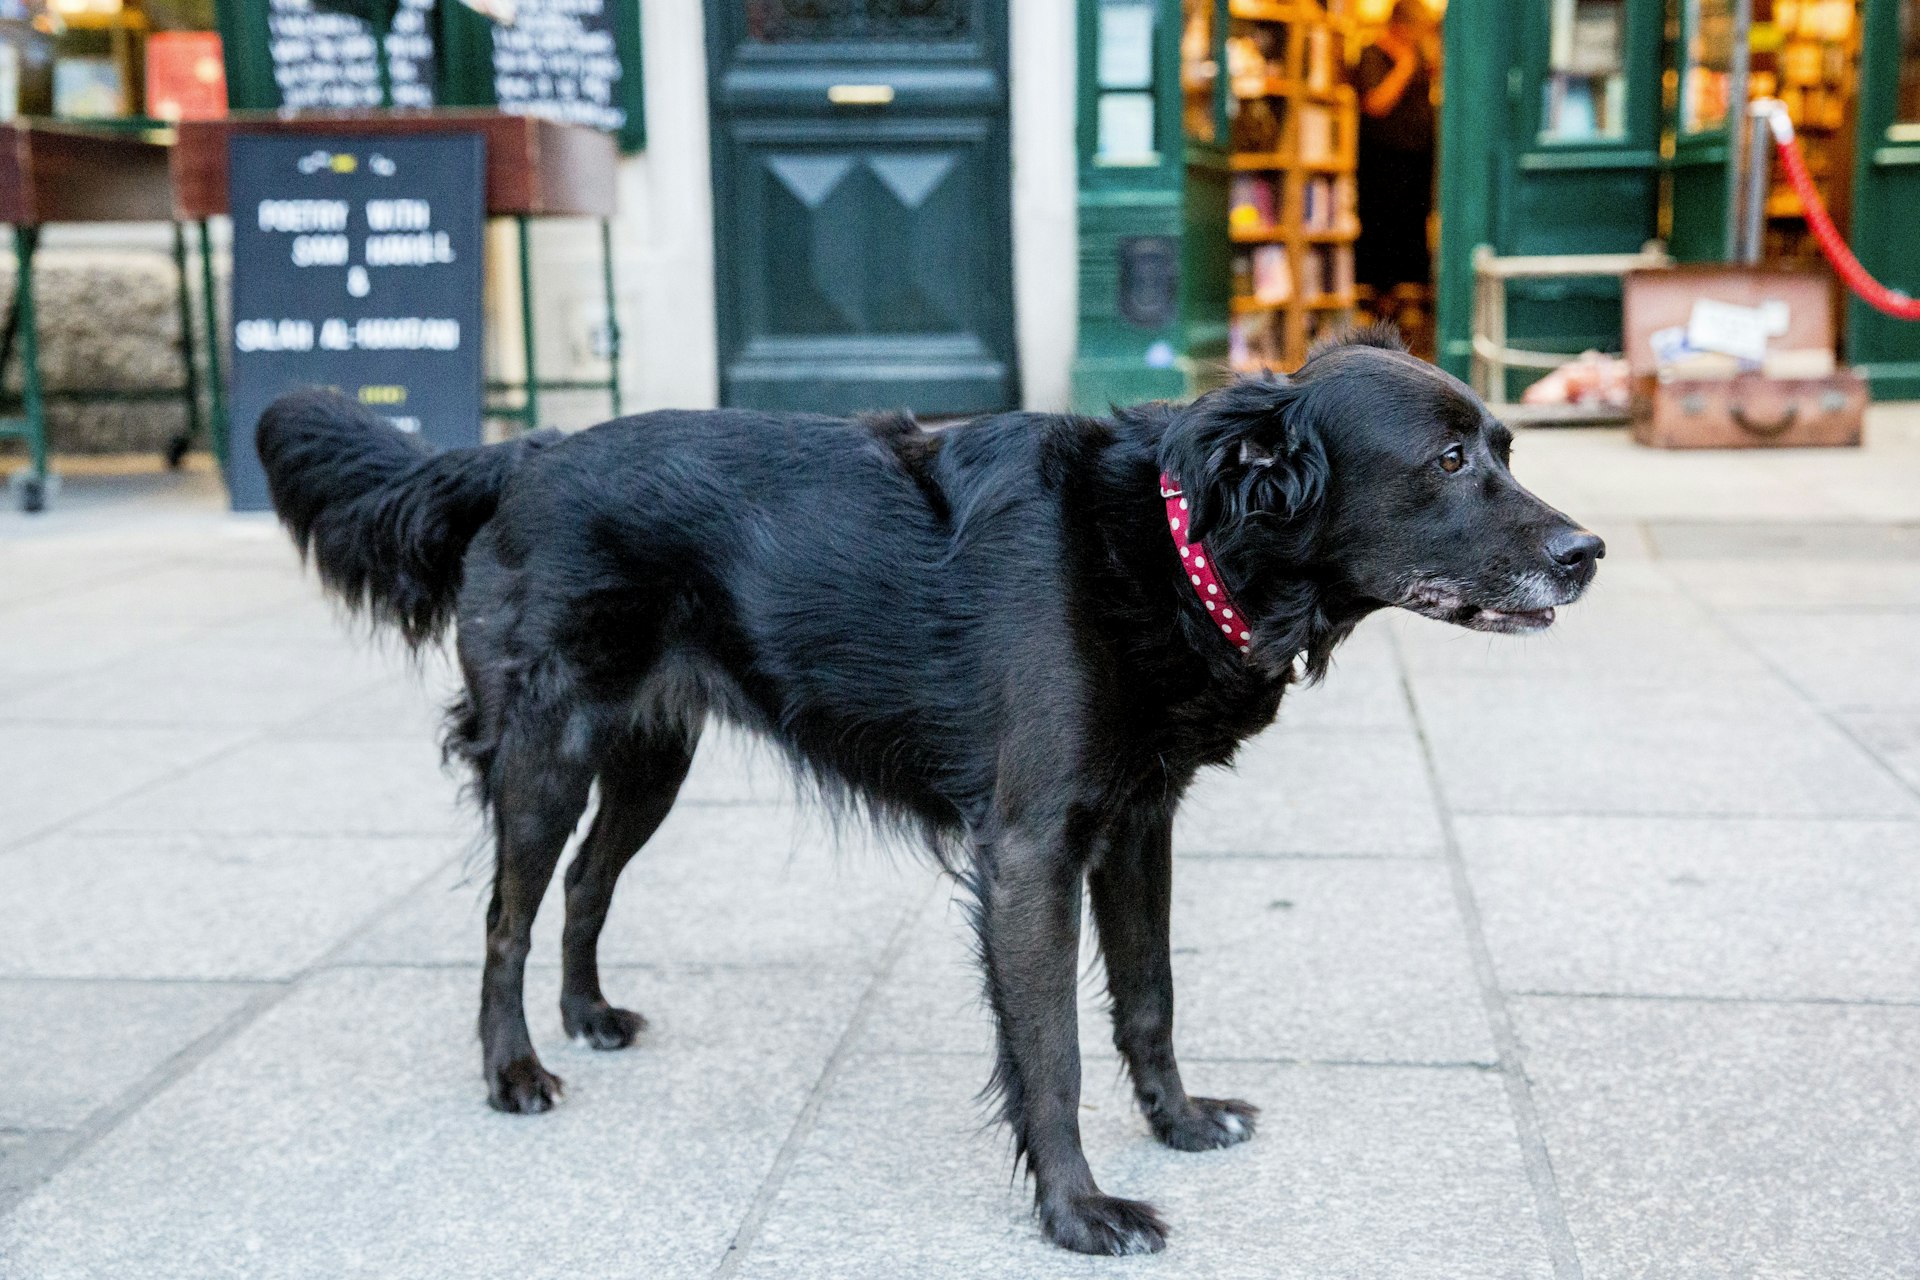 A black dog stands on the pavement outside a bookstore